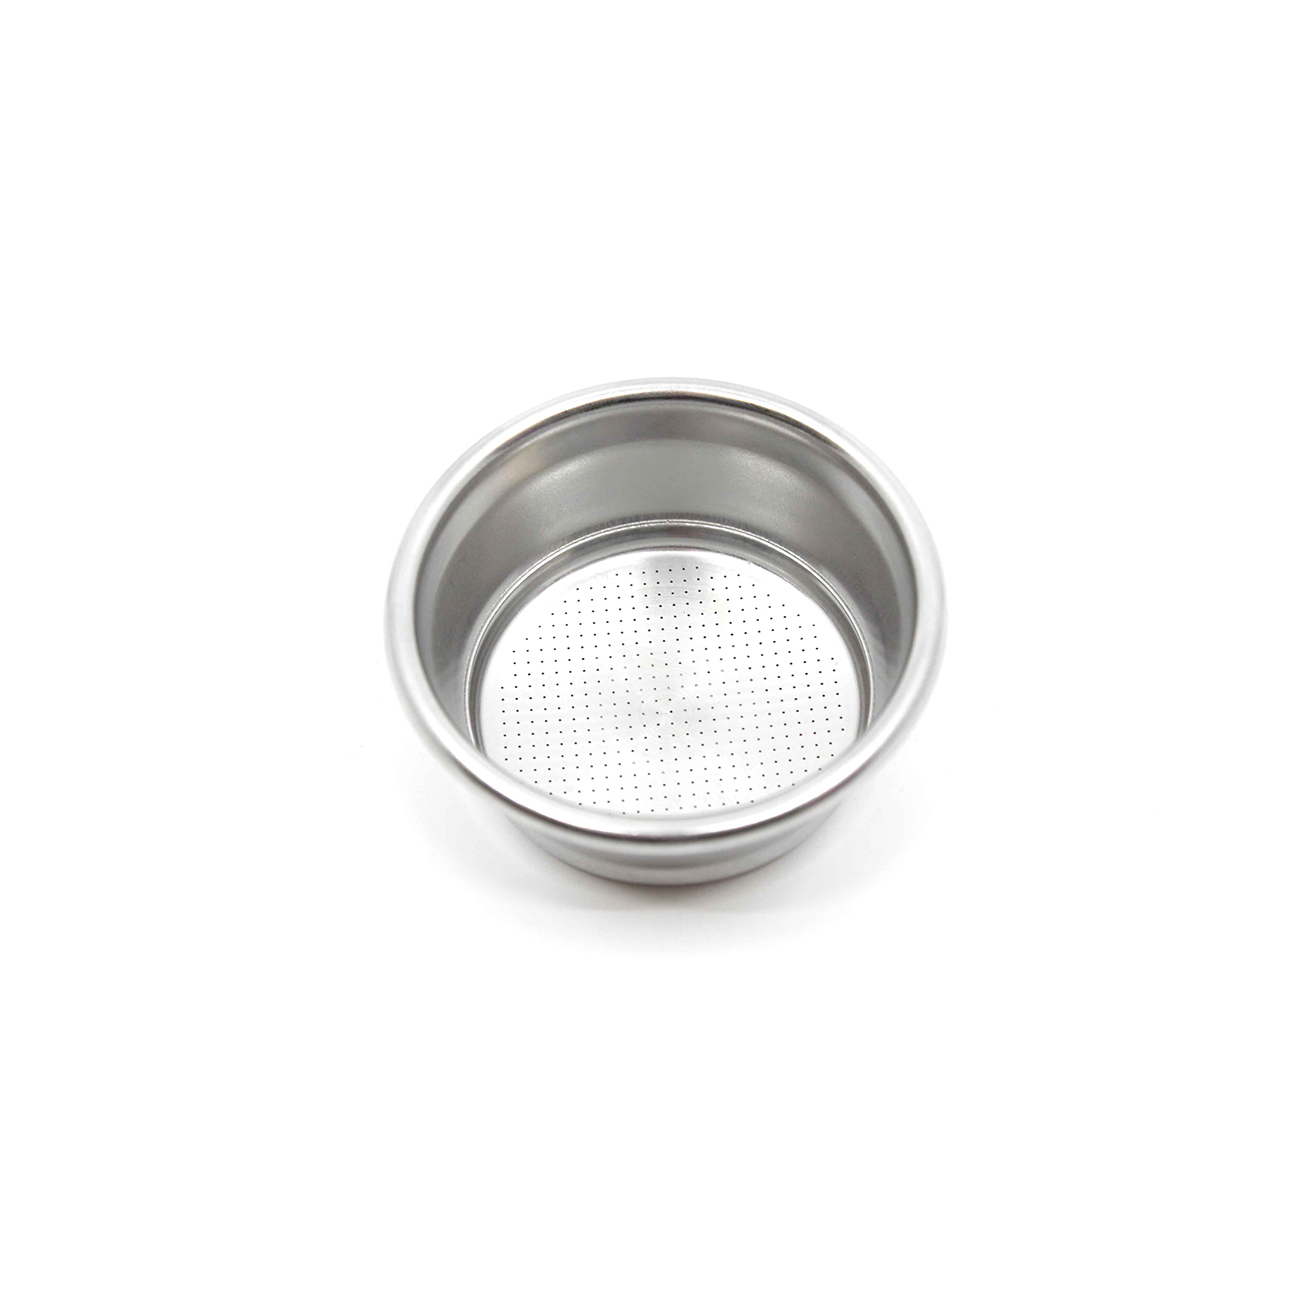 Filter 2 Cup Dual Wall 54mm